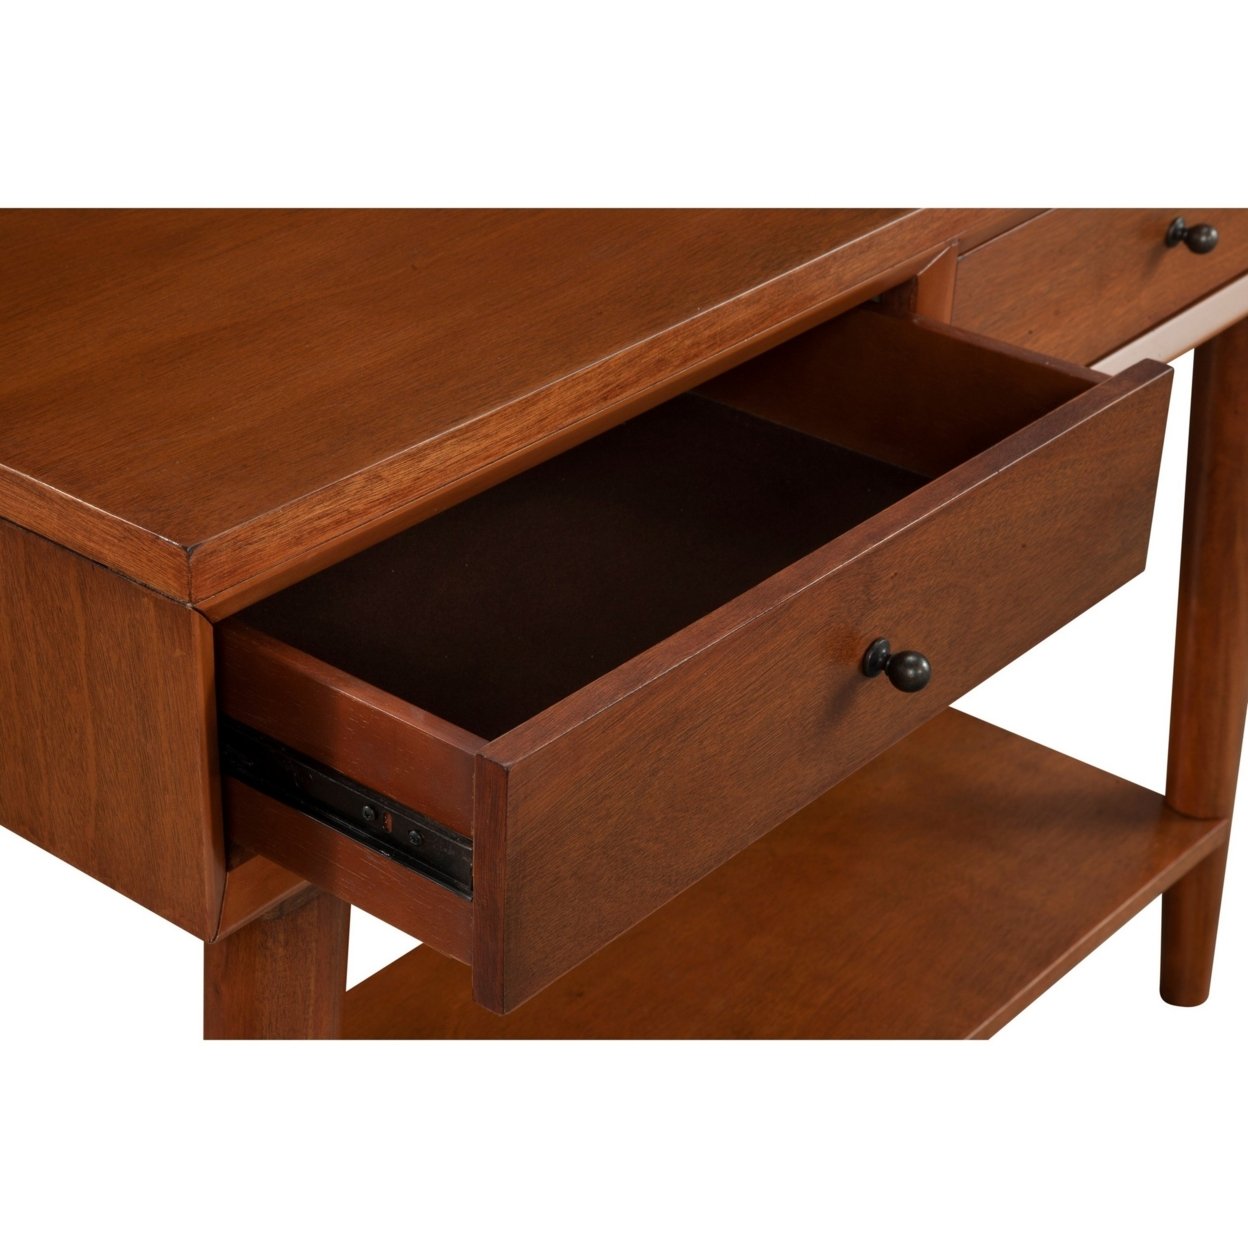 Console Table With 2 Drawers And Angled Legs, Brown- Saltoro Sherpi